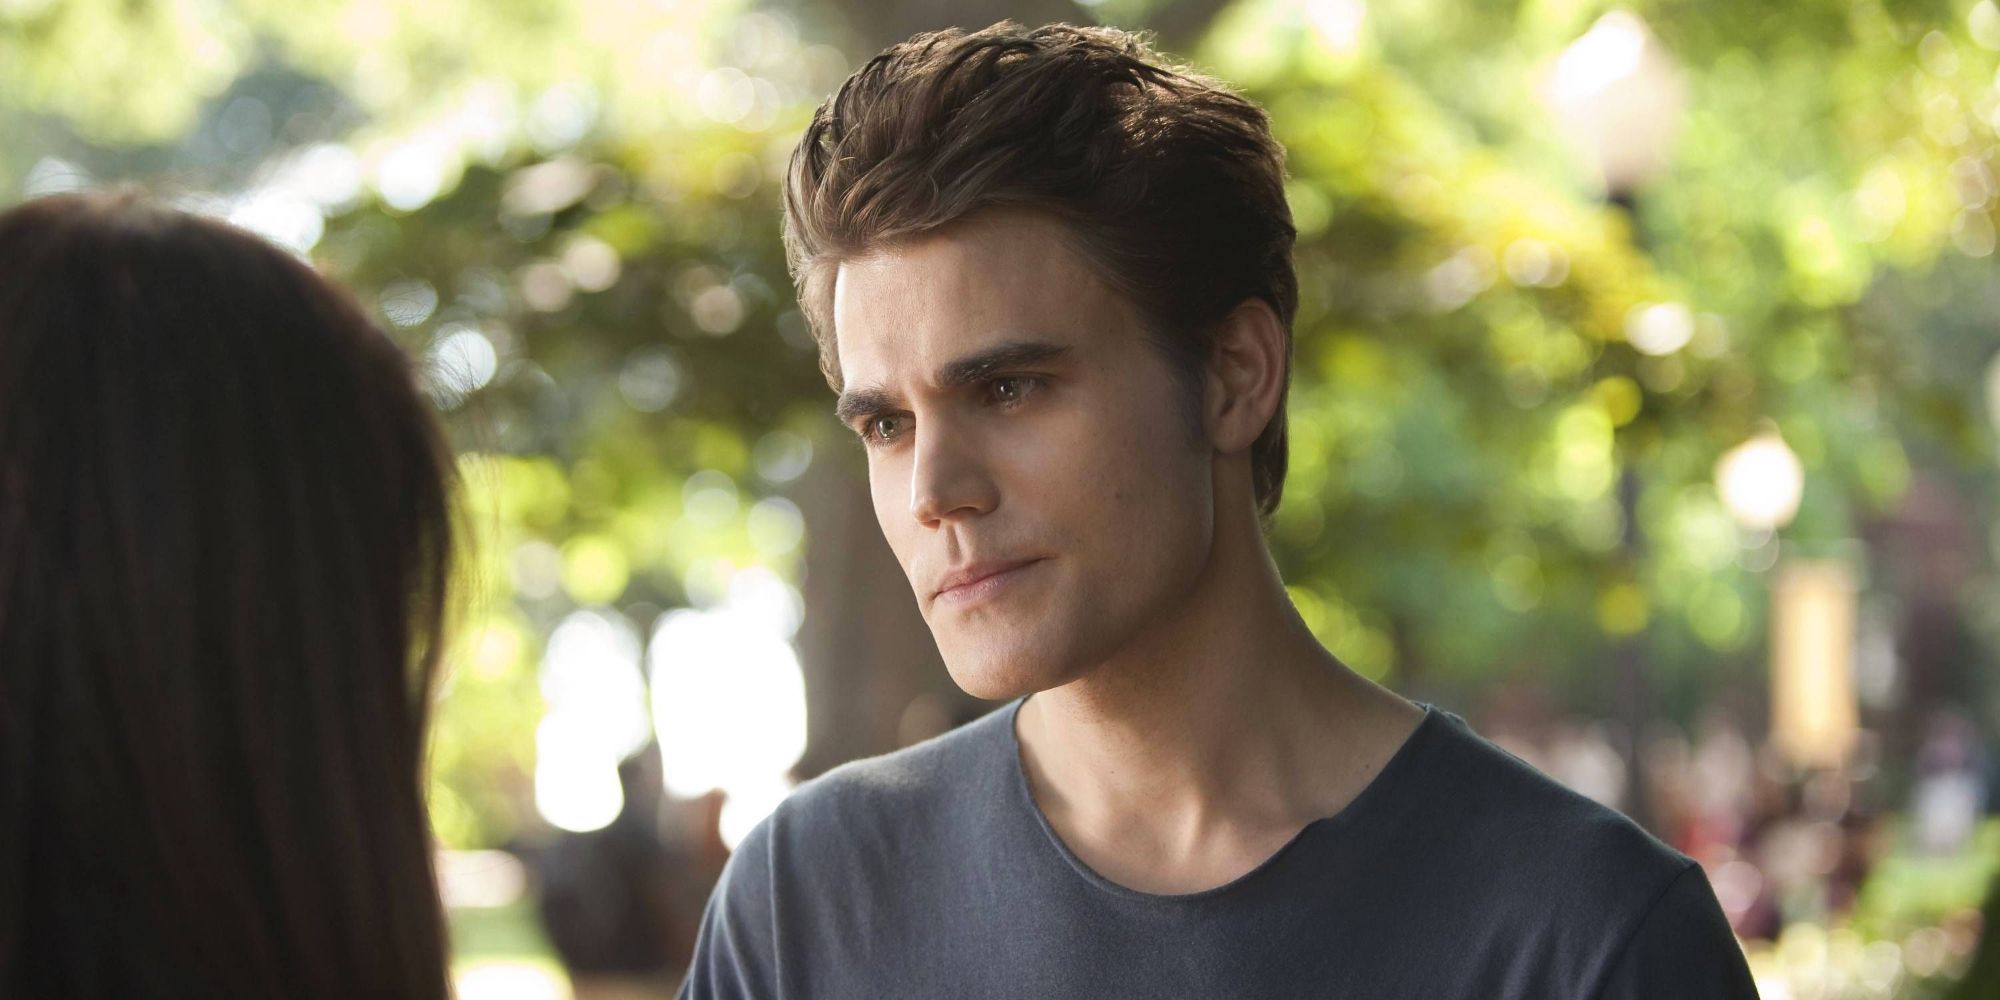 Silas in The Vampire Diaries talking to someone off camera.